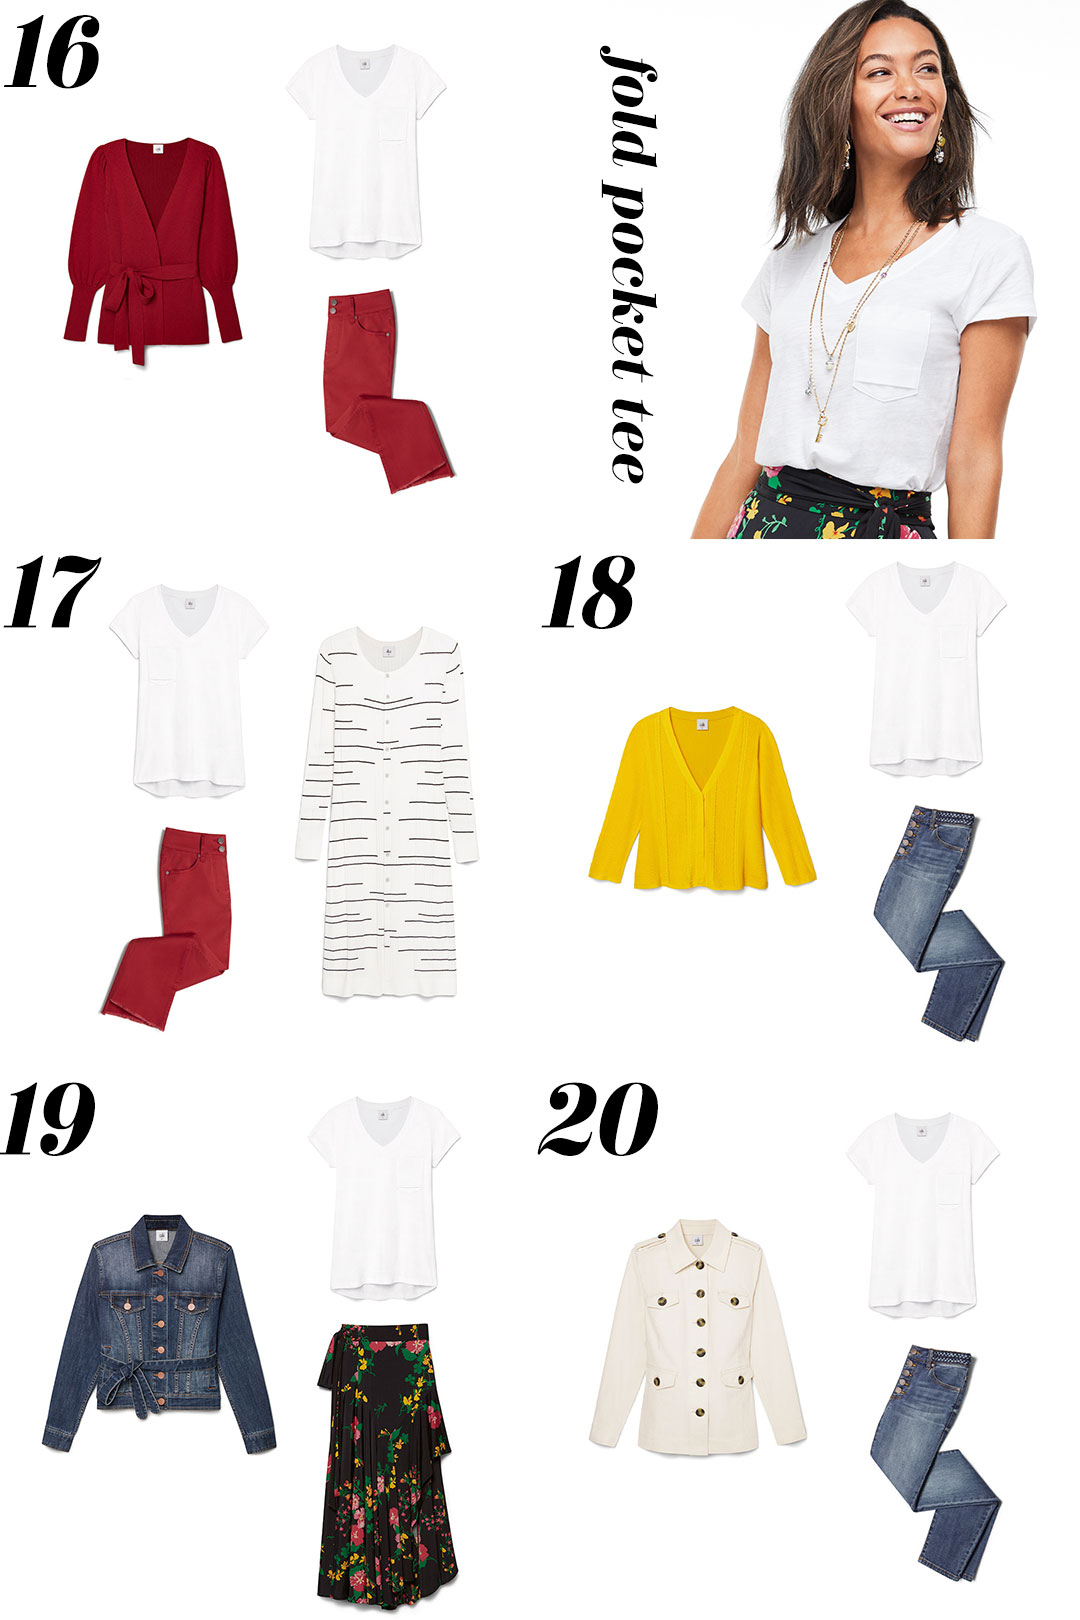 cabi Clothing | 30 Spring Outfit Ideas